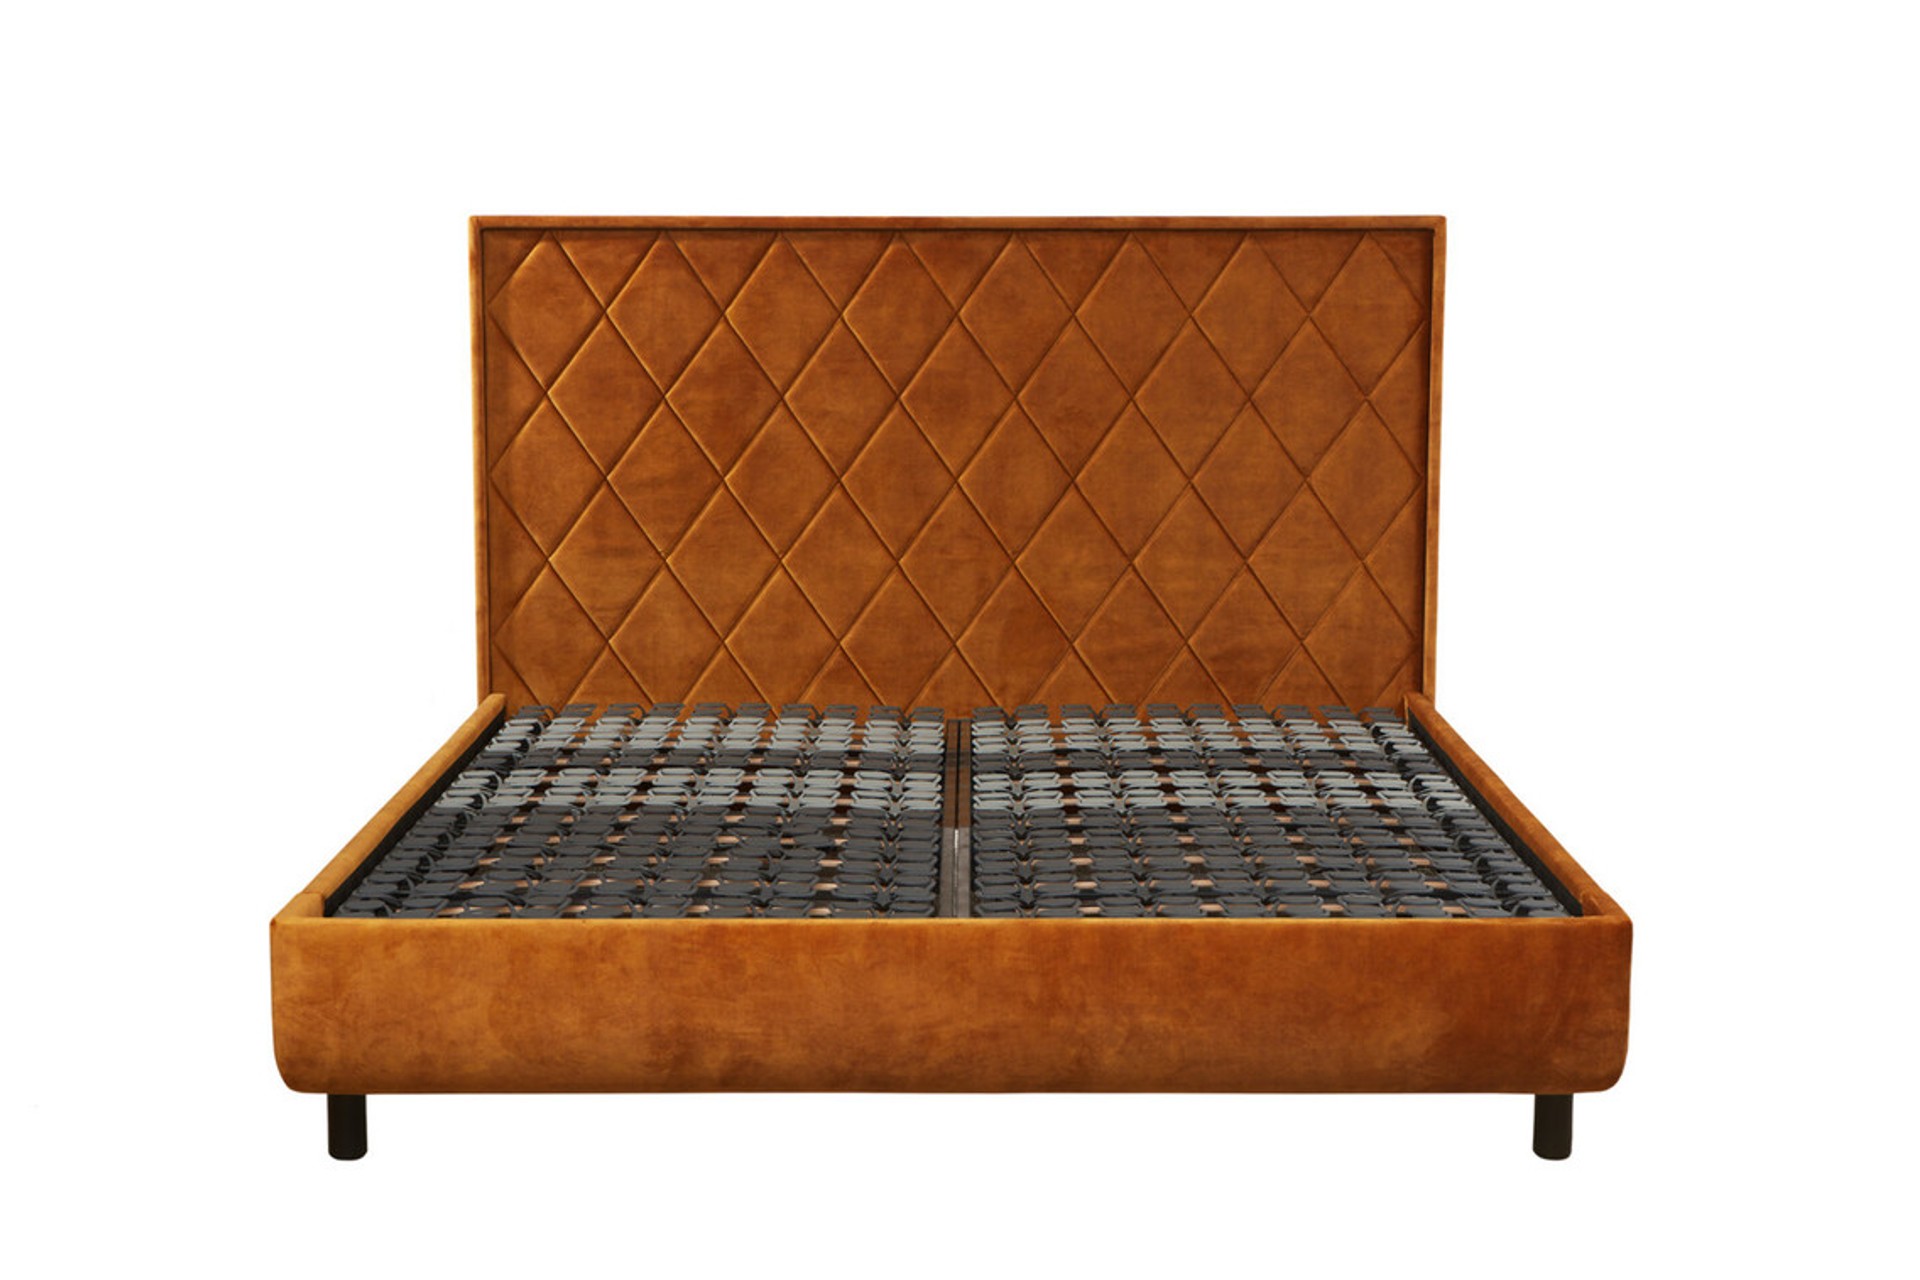 Tempur Arc™ Luxury Upholstered Bed Frame in vibrant, warm copper